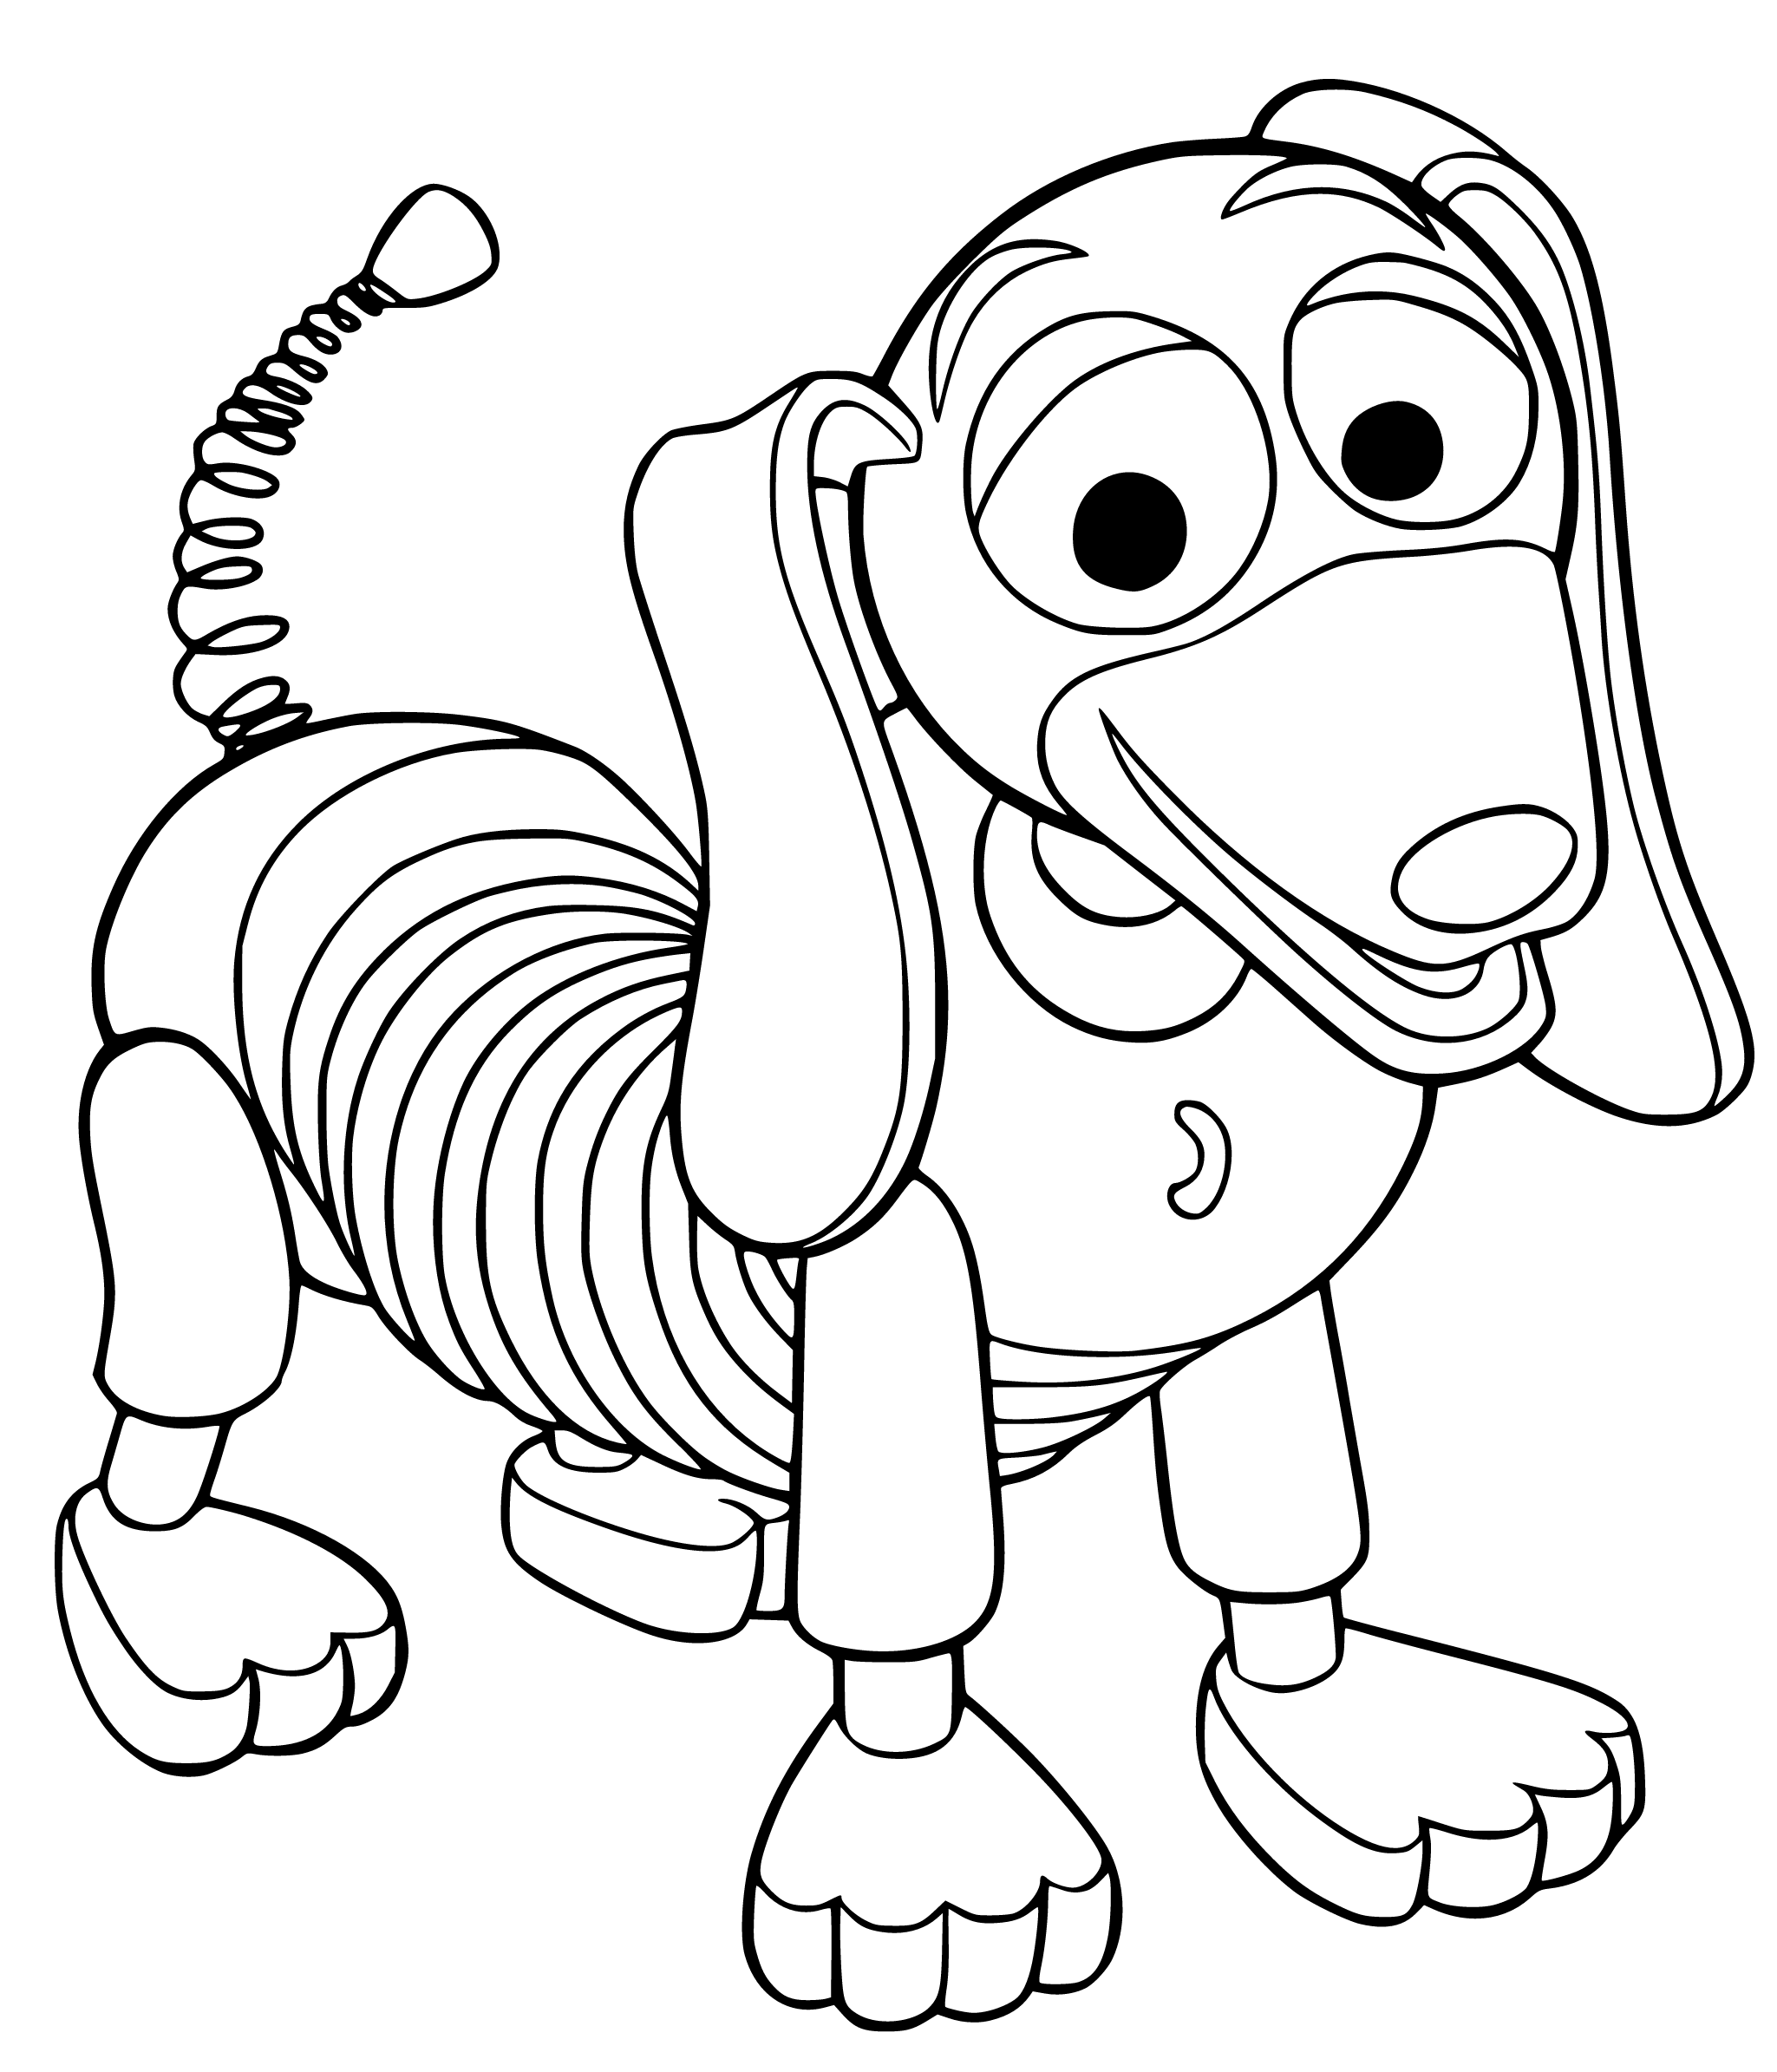 Toy Story Slinky Dog Coloring Page for Kids - SheetalColor.com